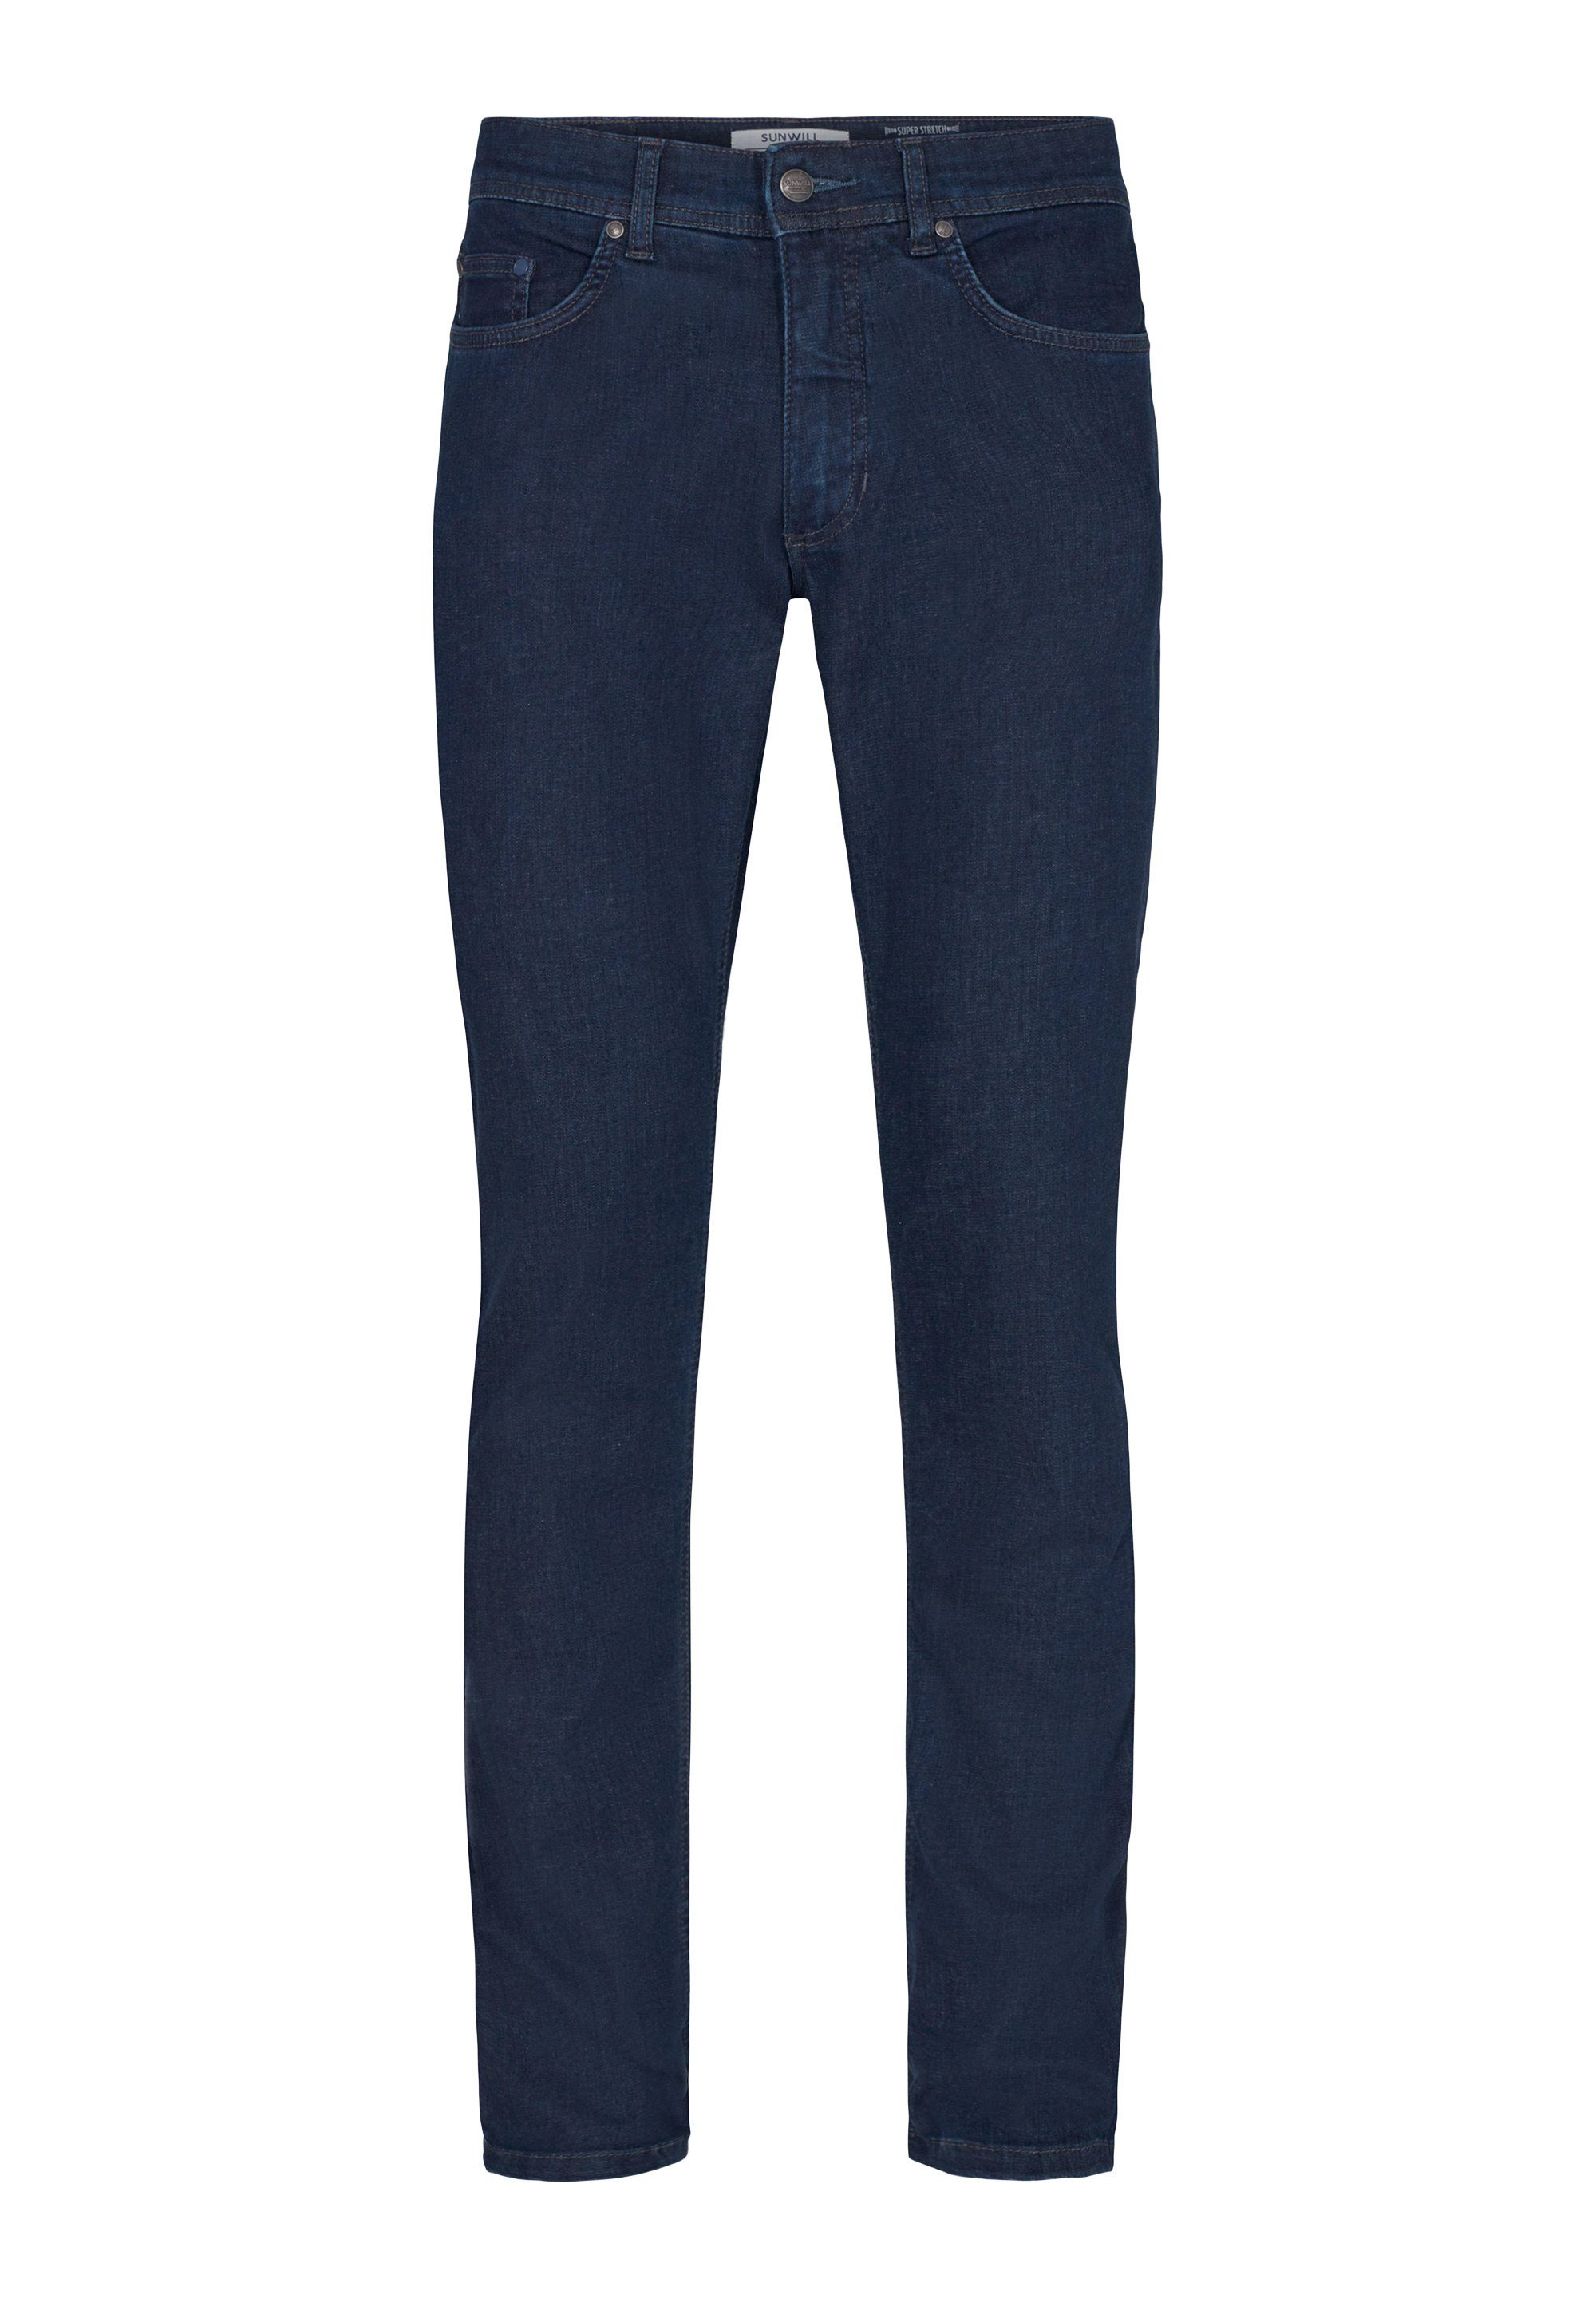 SUNWILL Straight-Jeans Super Stretch navy dark Fit in Fitted